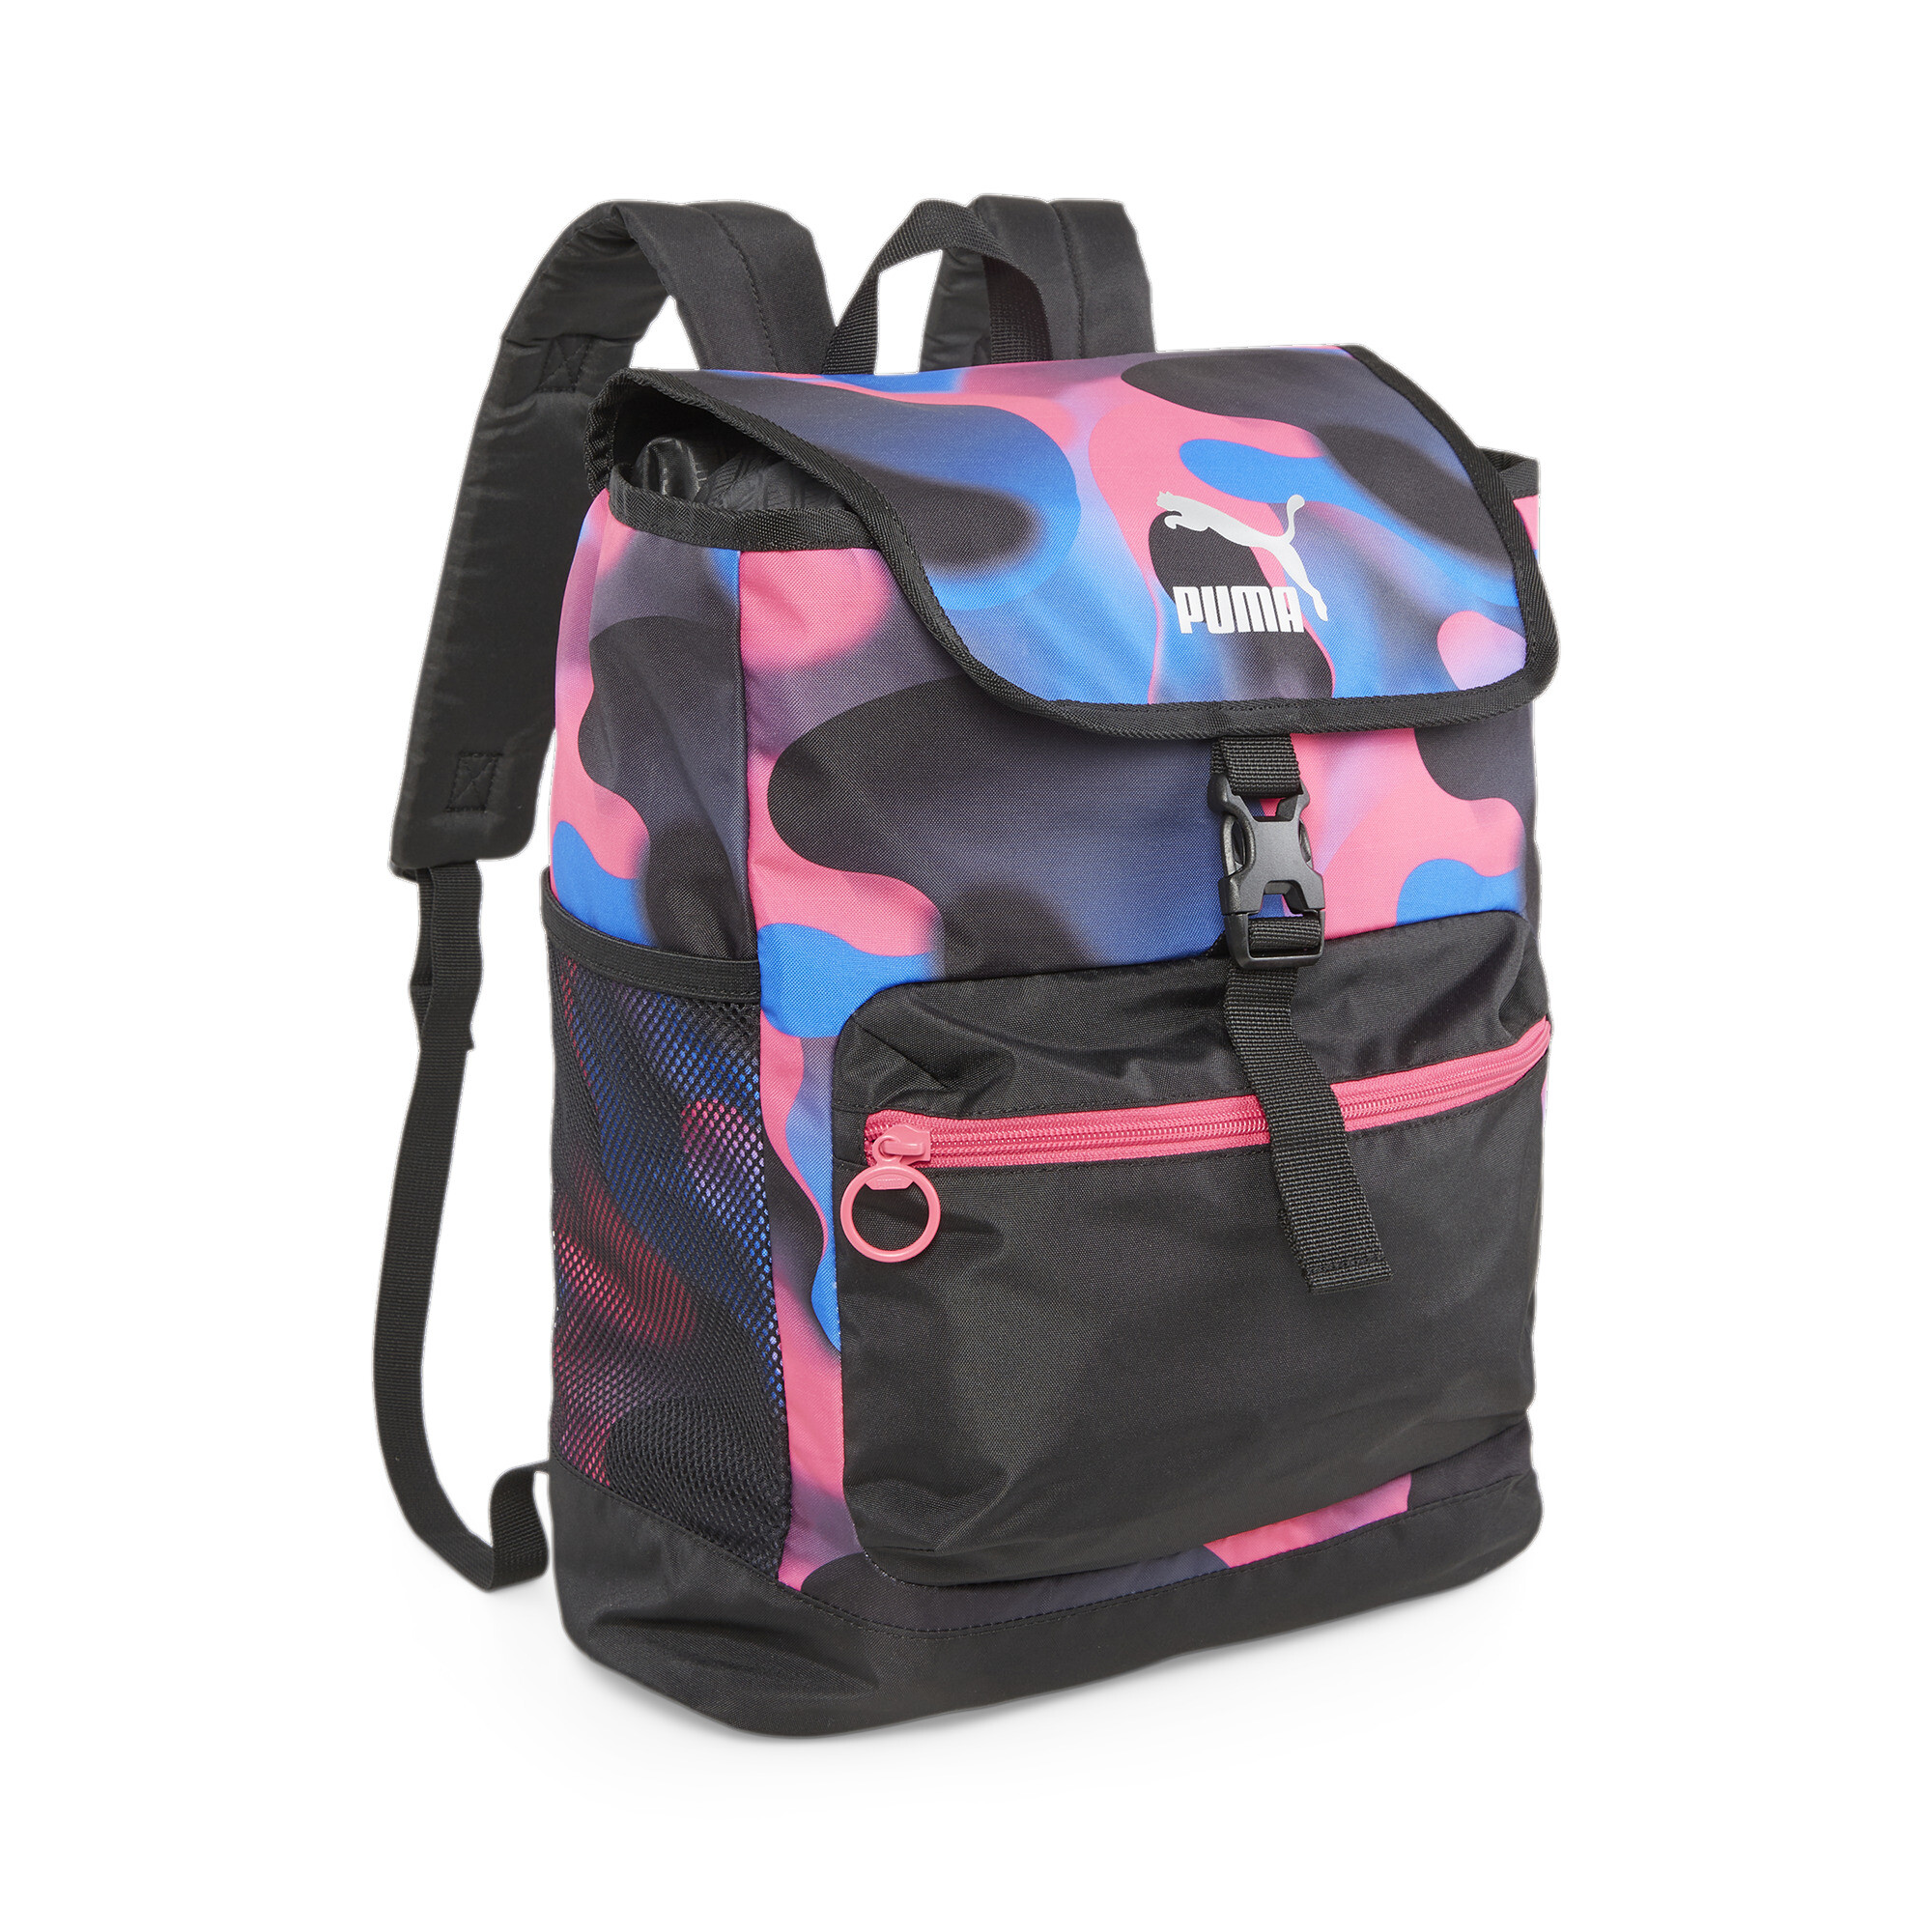 Puma Cosmic Girl Youth Backpack, Black, Accessories